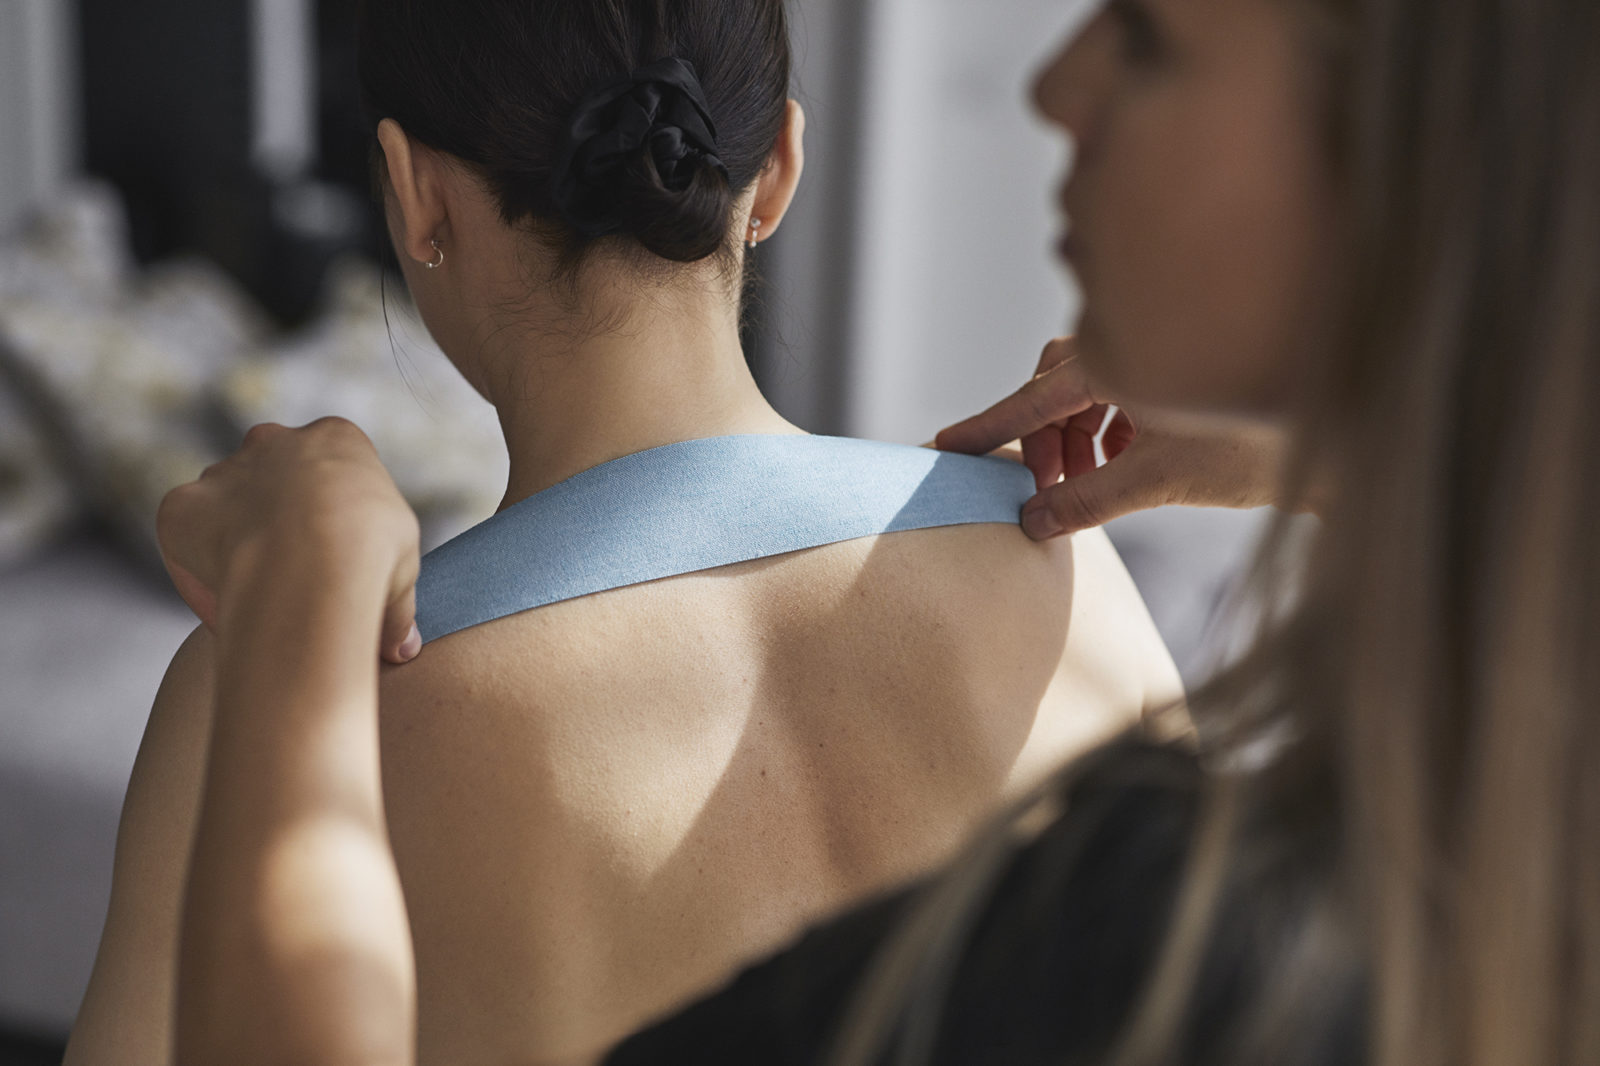 Black tape Kinesio Taping being applied to the back, administered by therapist. Photo Lars Petter Pettersen